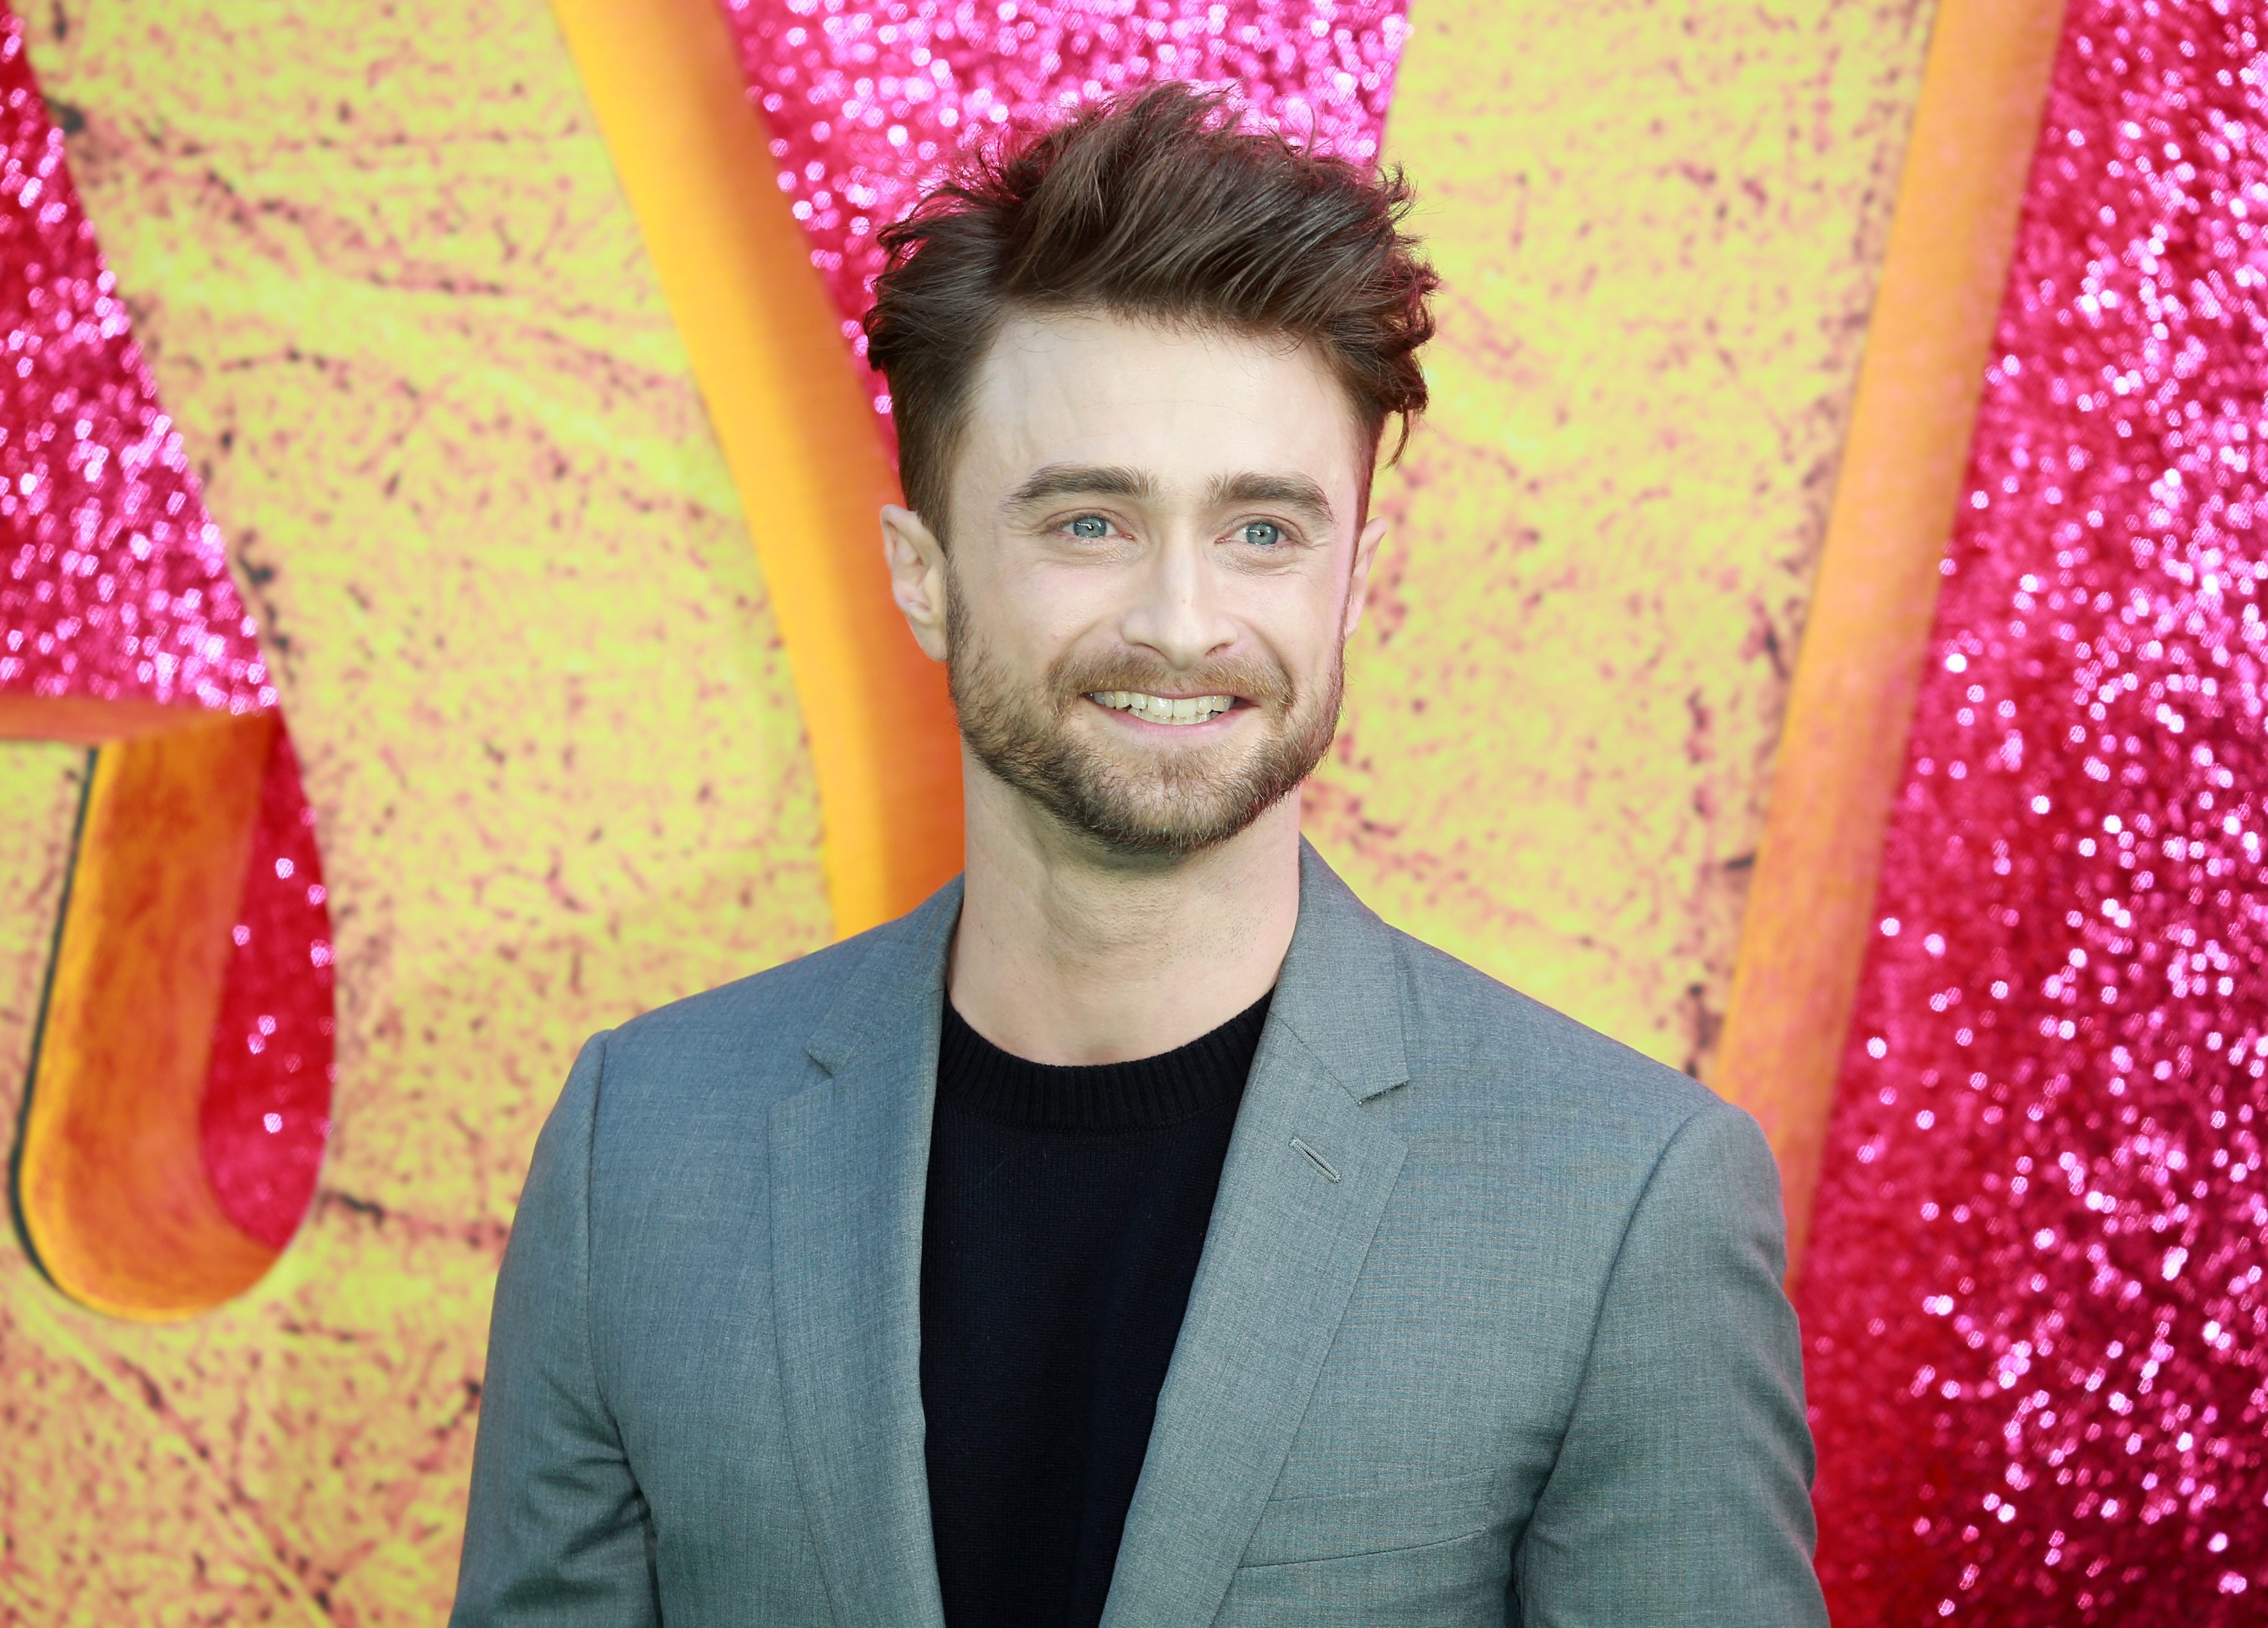 Daniel Radcliffe Height: How Tall Is The Harry Potter Actor? - Hood MWR